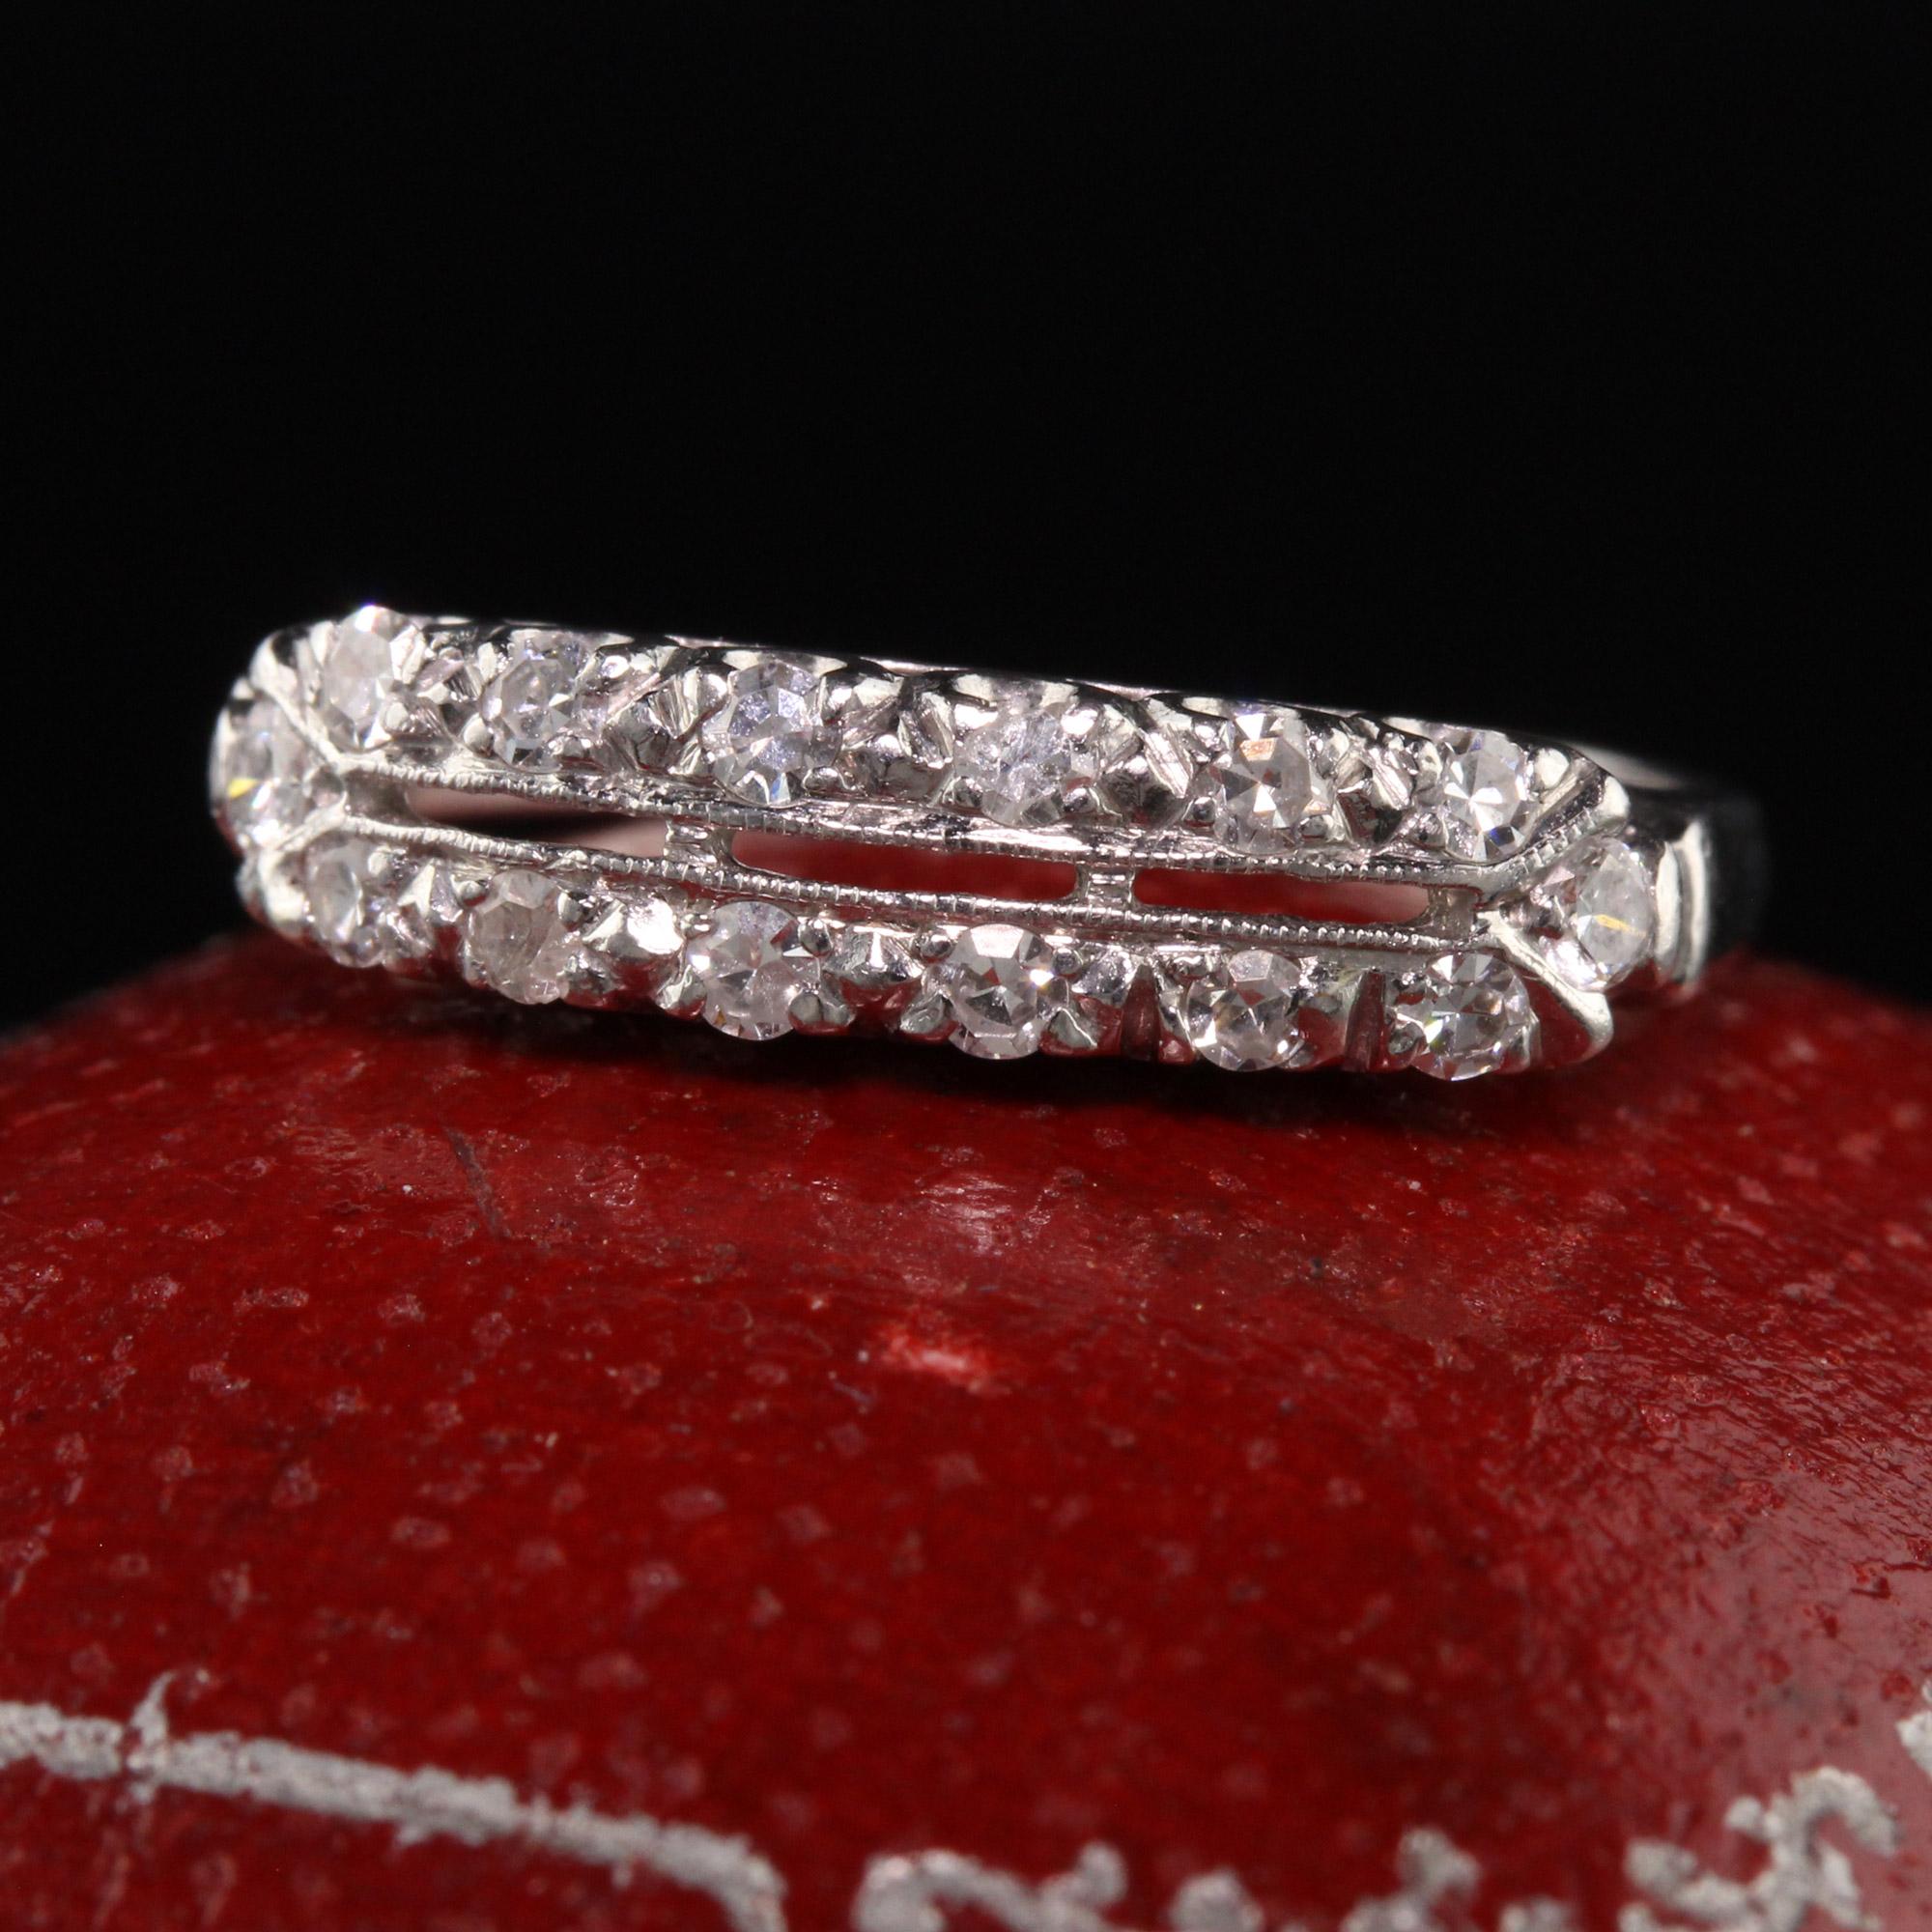 Beautiful Antique Art Deco Platinum Single Cut Diamond Filigree Wedding Band. This beautiful wedding band is crafted in platinum. The top of the ring holds single cut diamonds in a beautiful filigree design.

Item #R1229

Metal: Platinum

Weight: